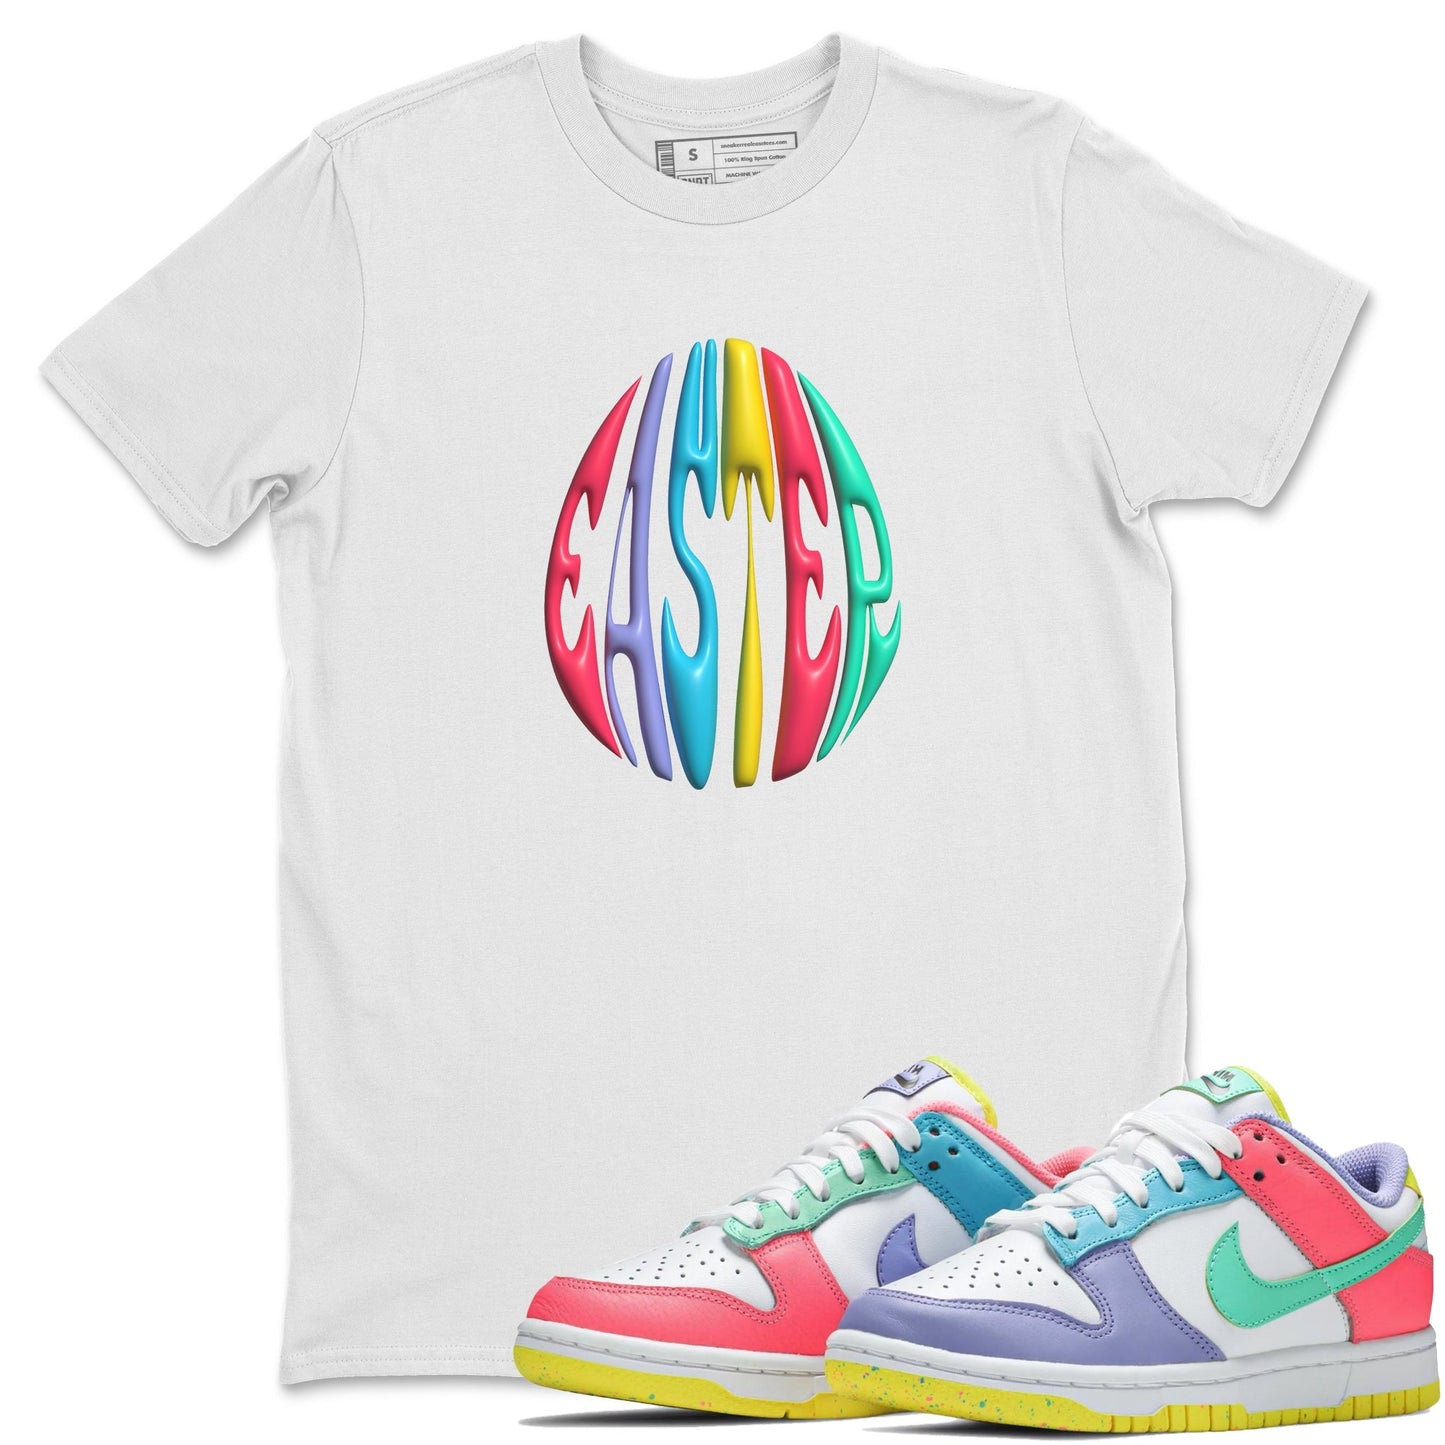 Dunk Easter Candy Sneaker Tees Drip Gear Zone 3D Easter Typo Sneaker Tees Nike Easter Shirt Unisex Shirts White 1